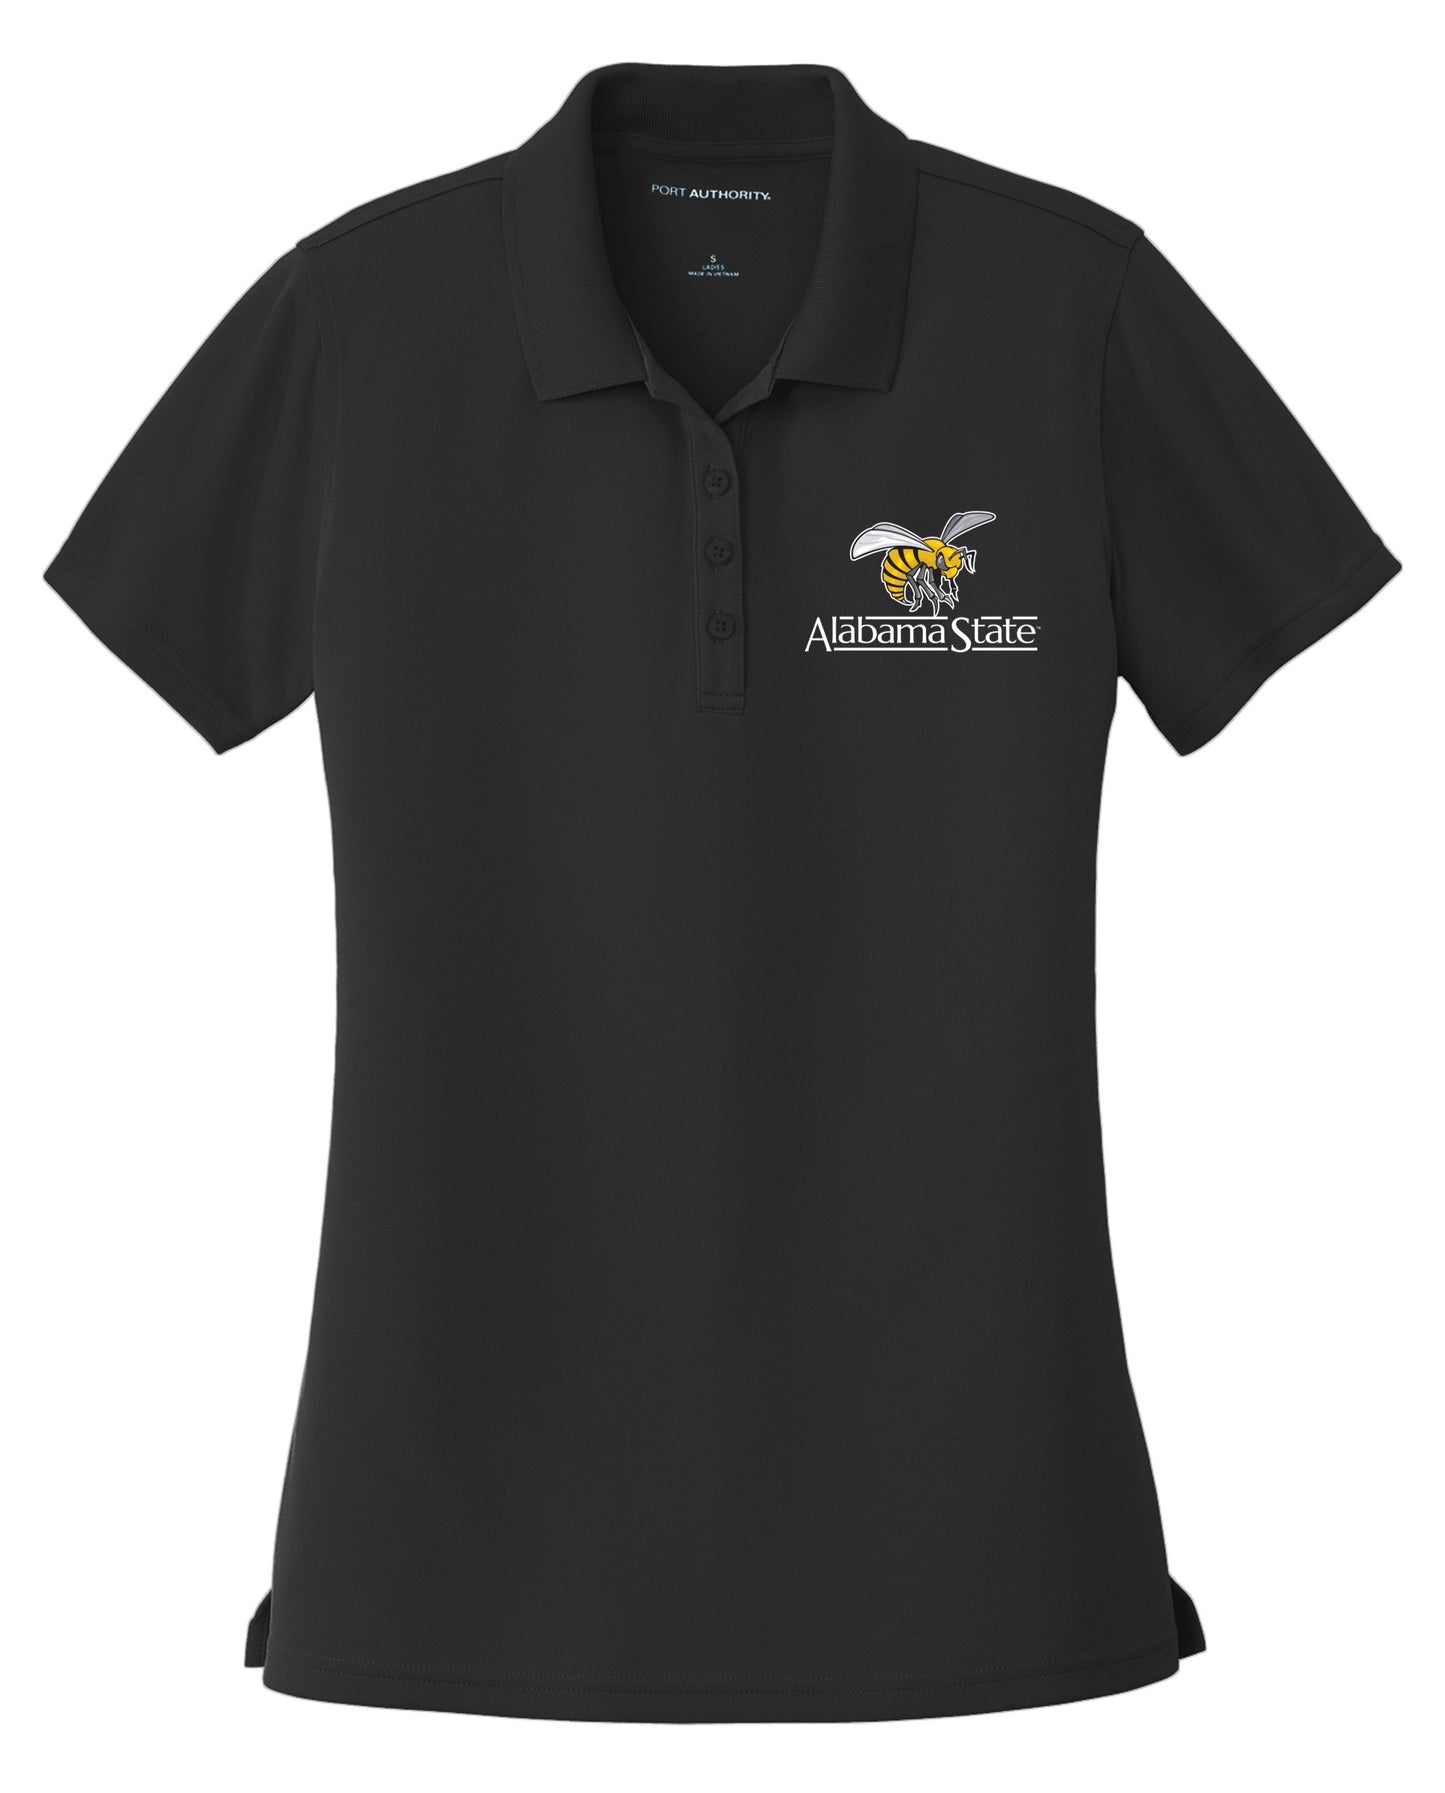 Alabama State Ladies Deluxe Polo